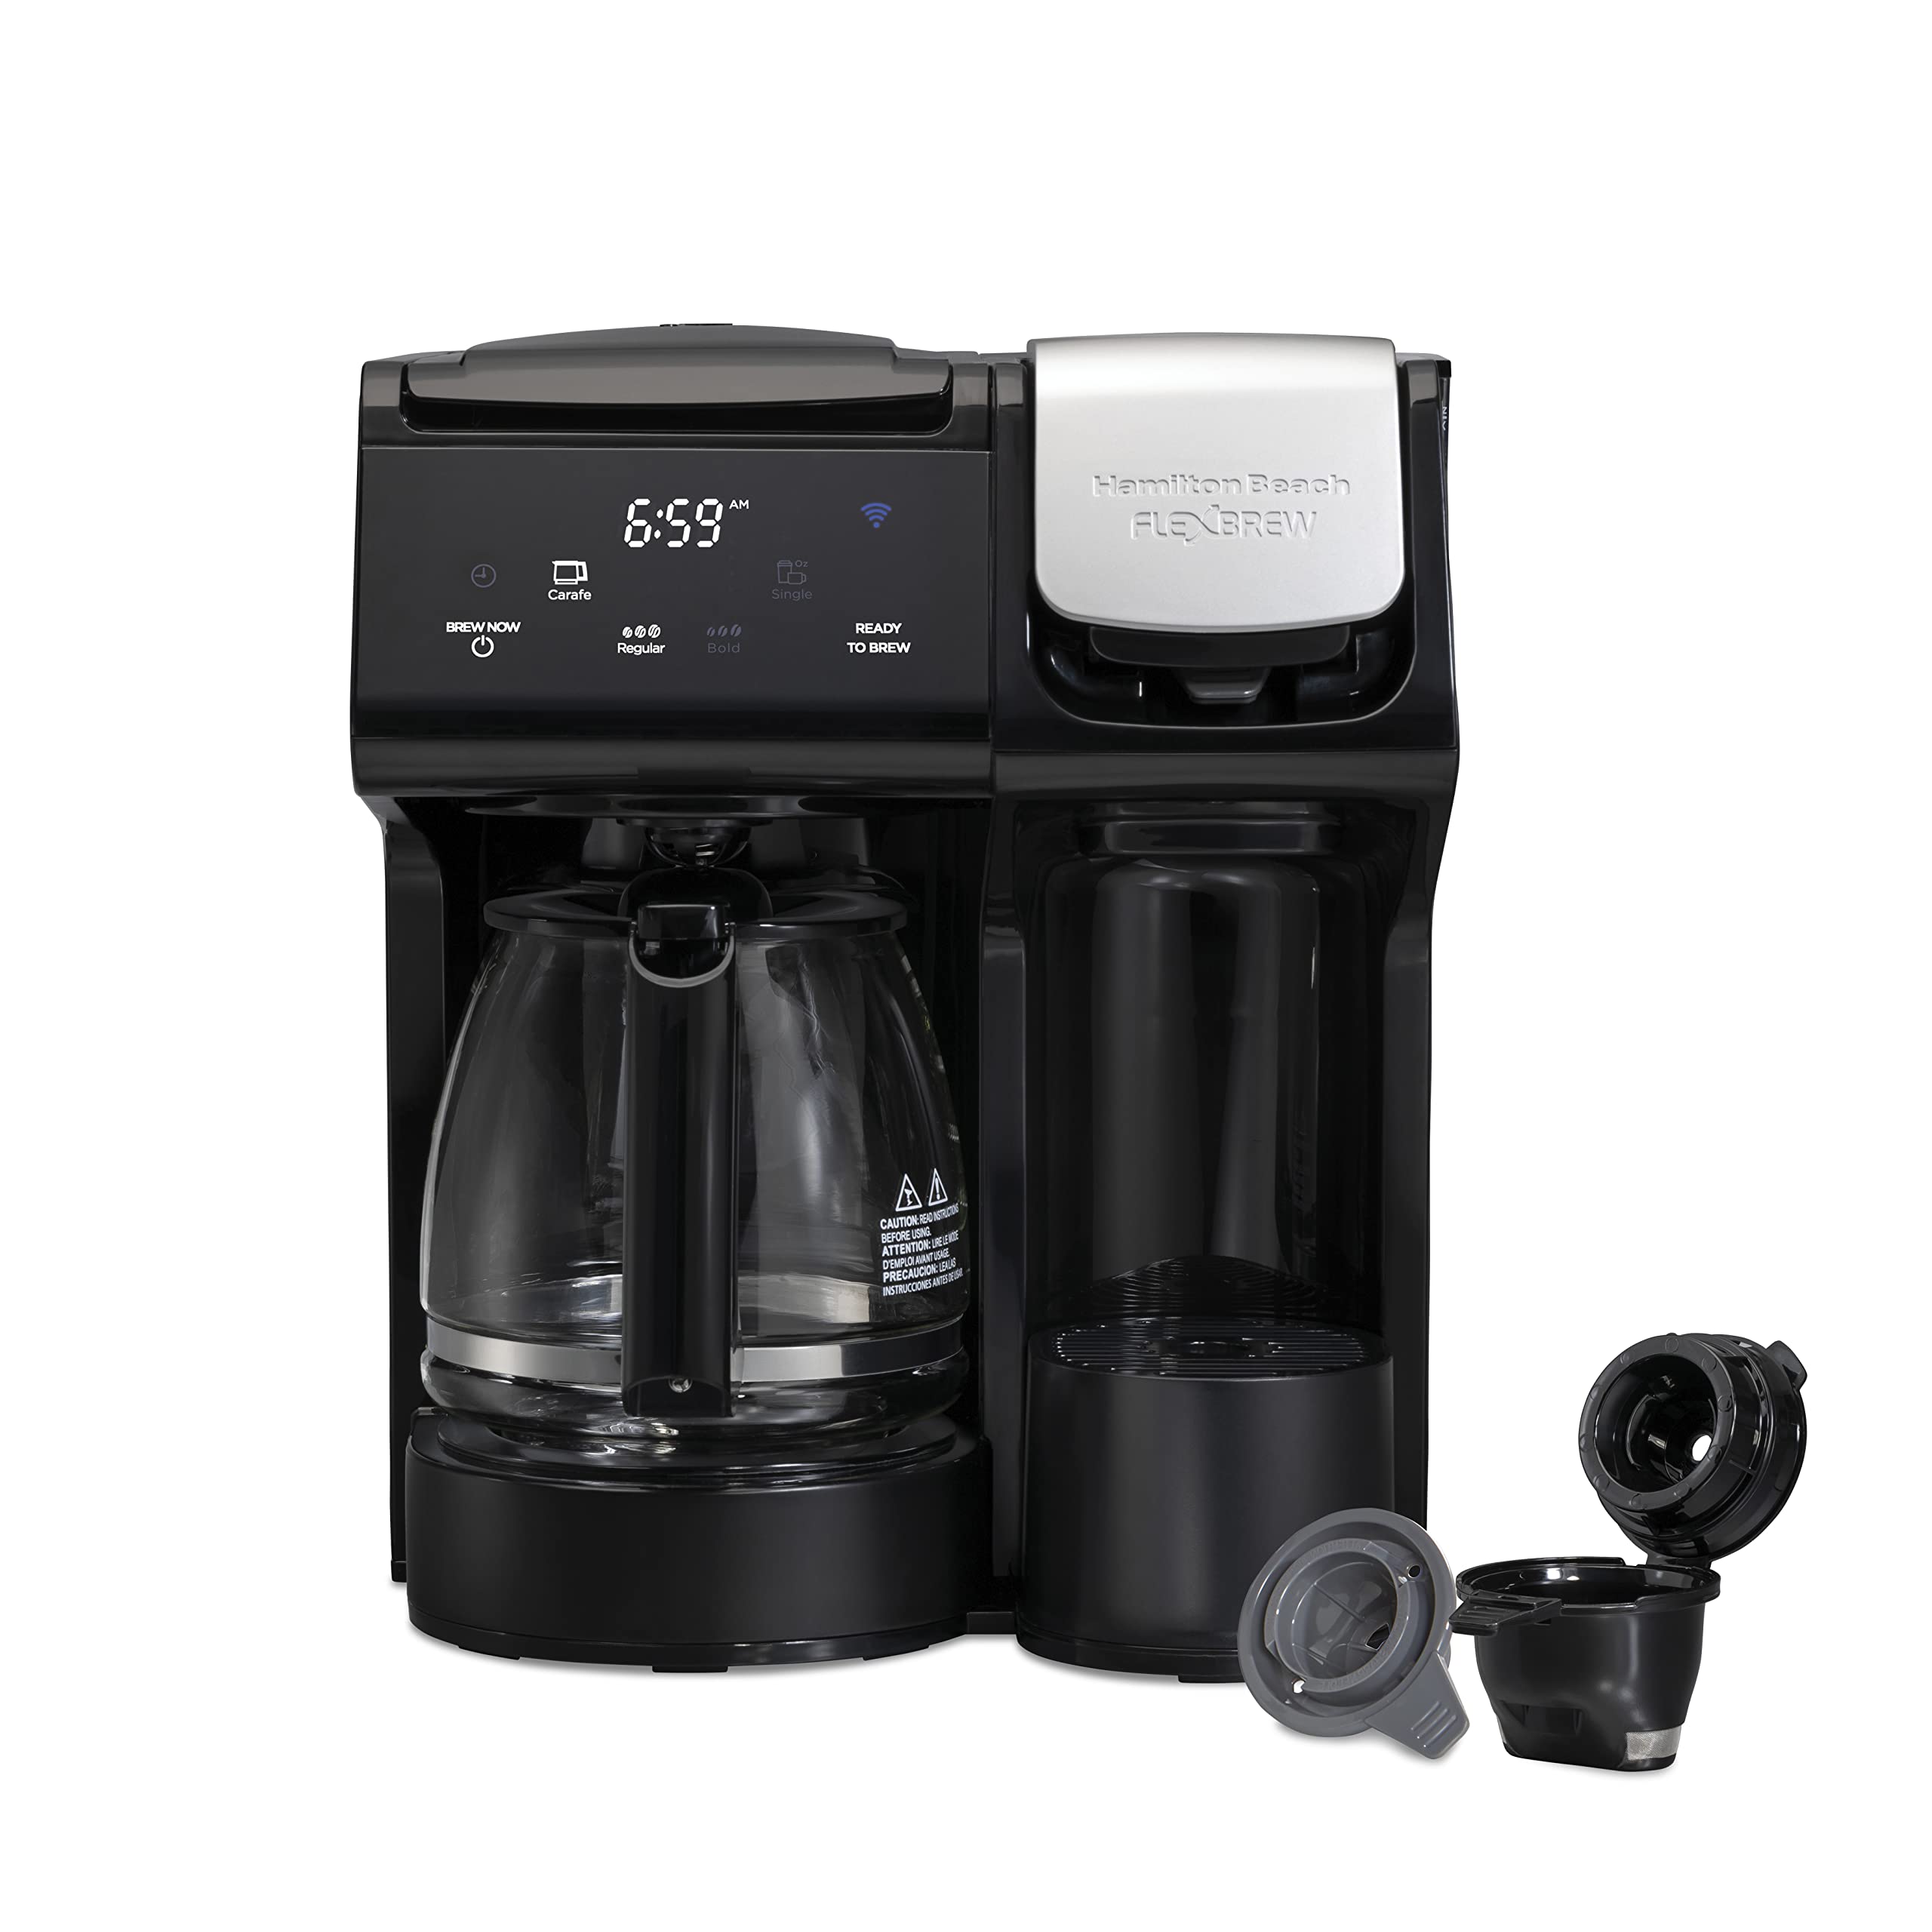 Hamilton Beach FlexBrew Trio 2-Way Works with Alexa Smart Coffee Maker, Compatible with K-Cup Pods or Grounds, Single Serve or Full 12c Pot, 56 oz. Removable Reservoir, Black (49911)